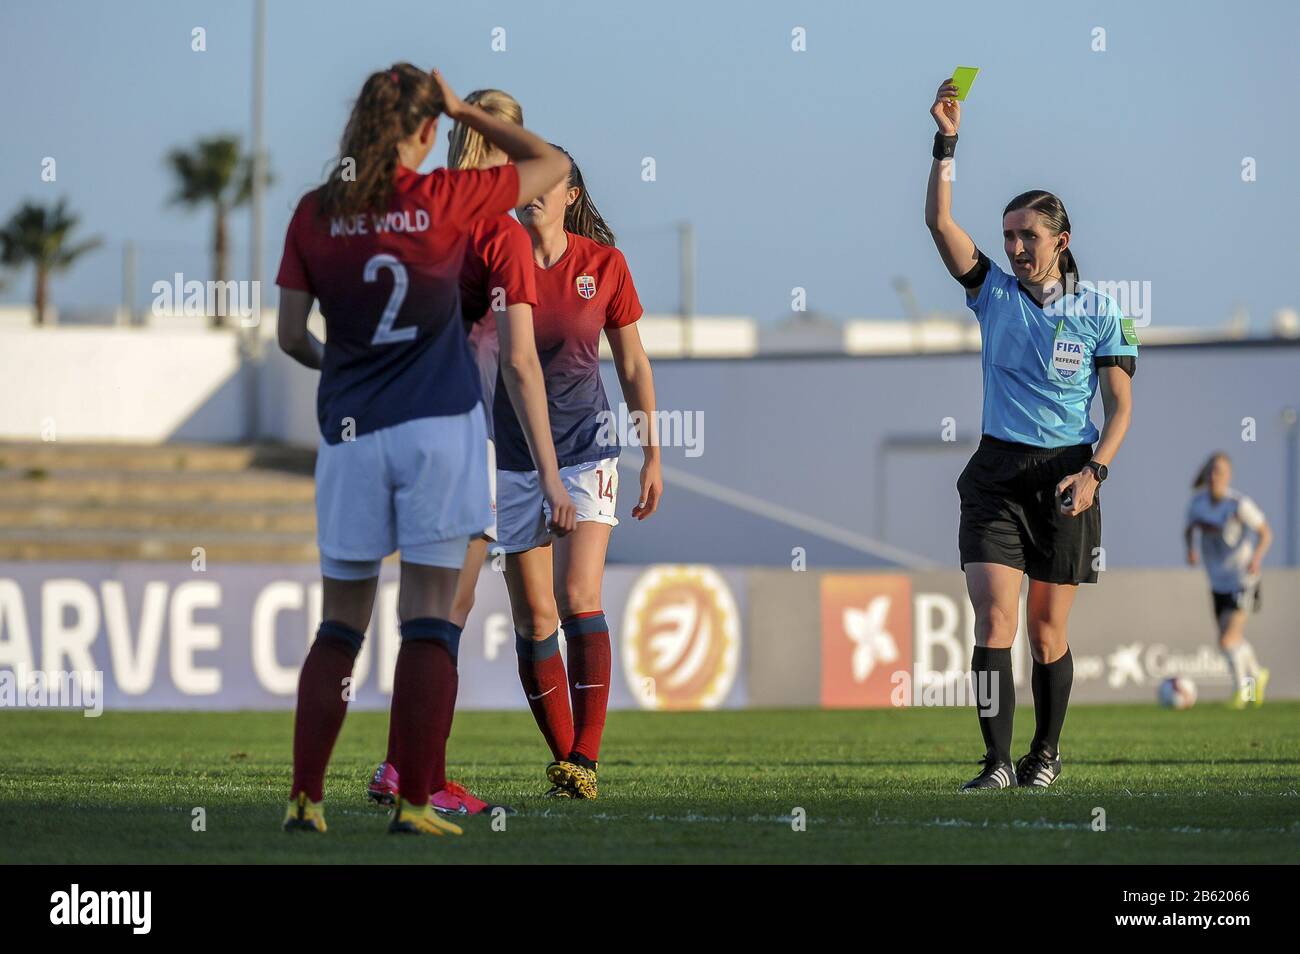 Lagos, Portugal. 07th Mar, 2020. LAGOS, PORTUGAL: MAR 7TH yellow card  pictured during the female football game between the national teams of  Germany and Norway on the second matchday of the Algarve